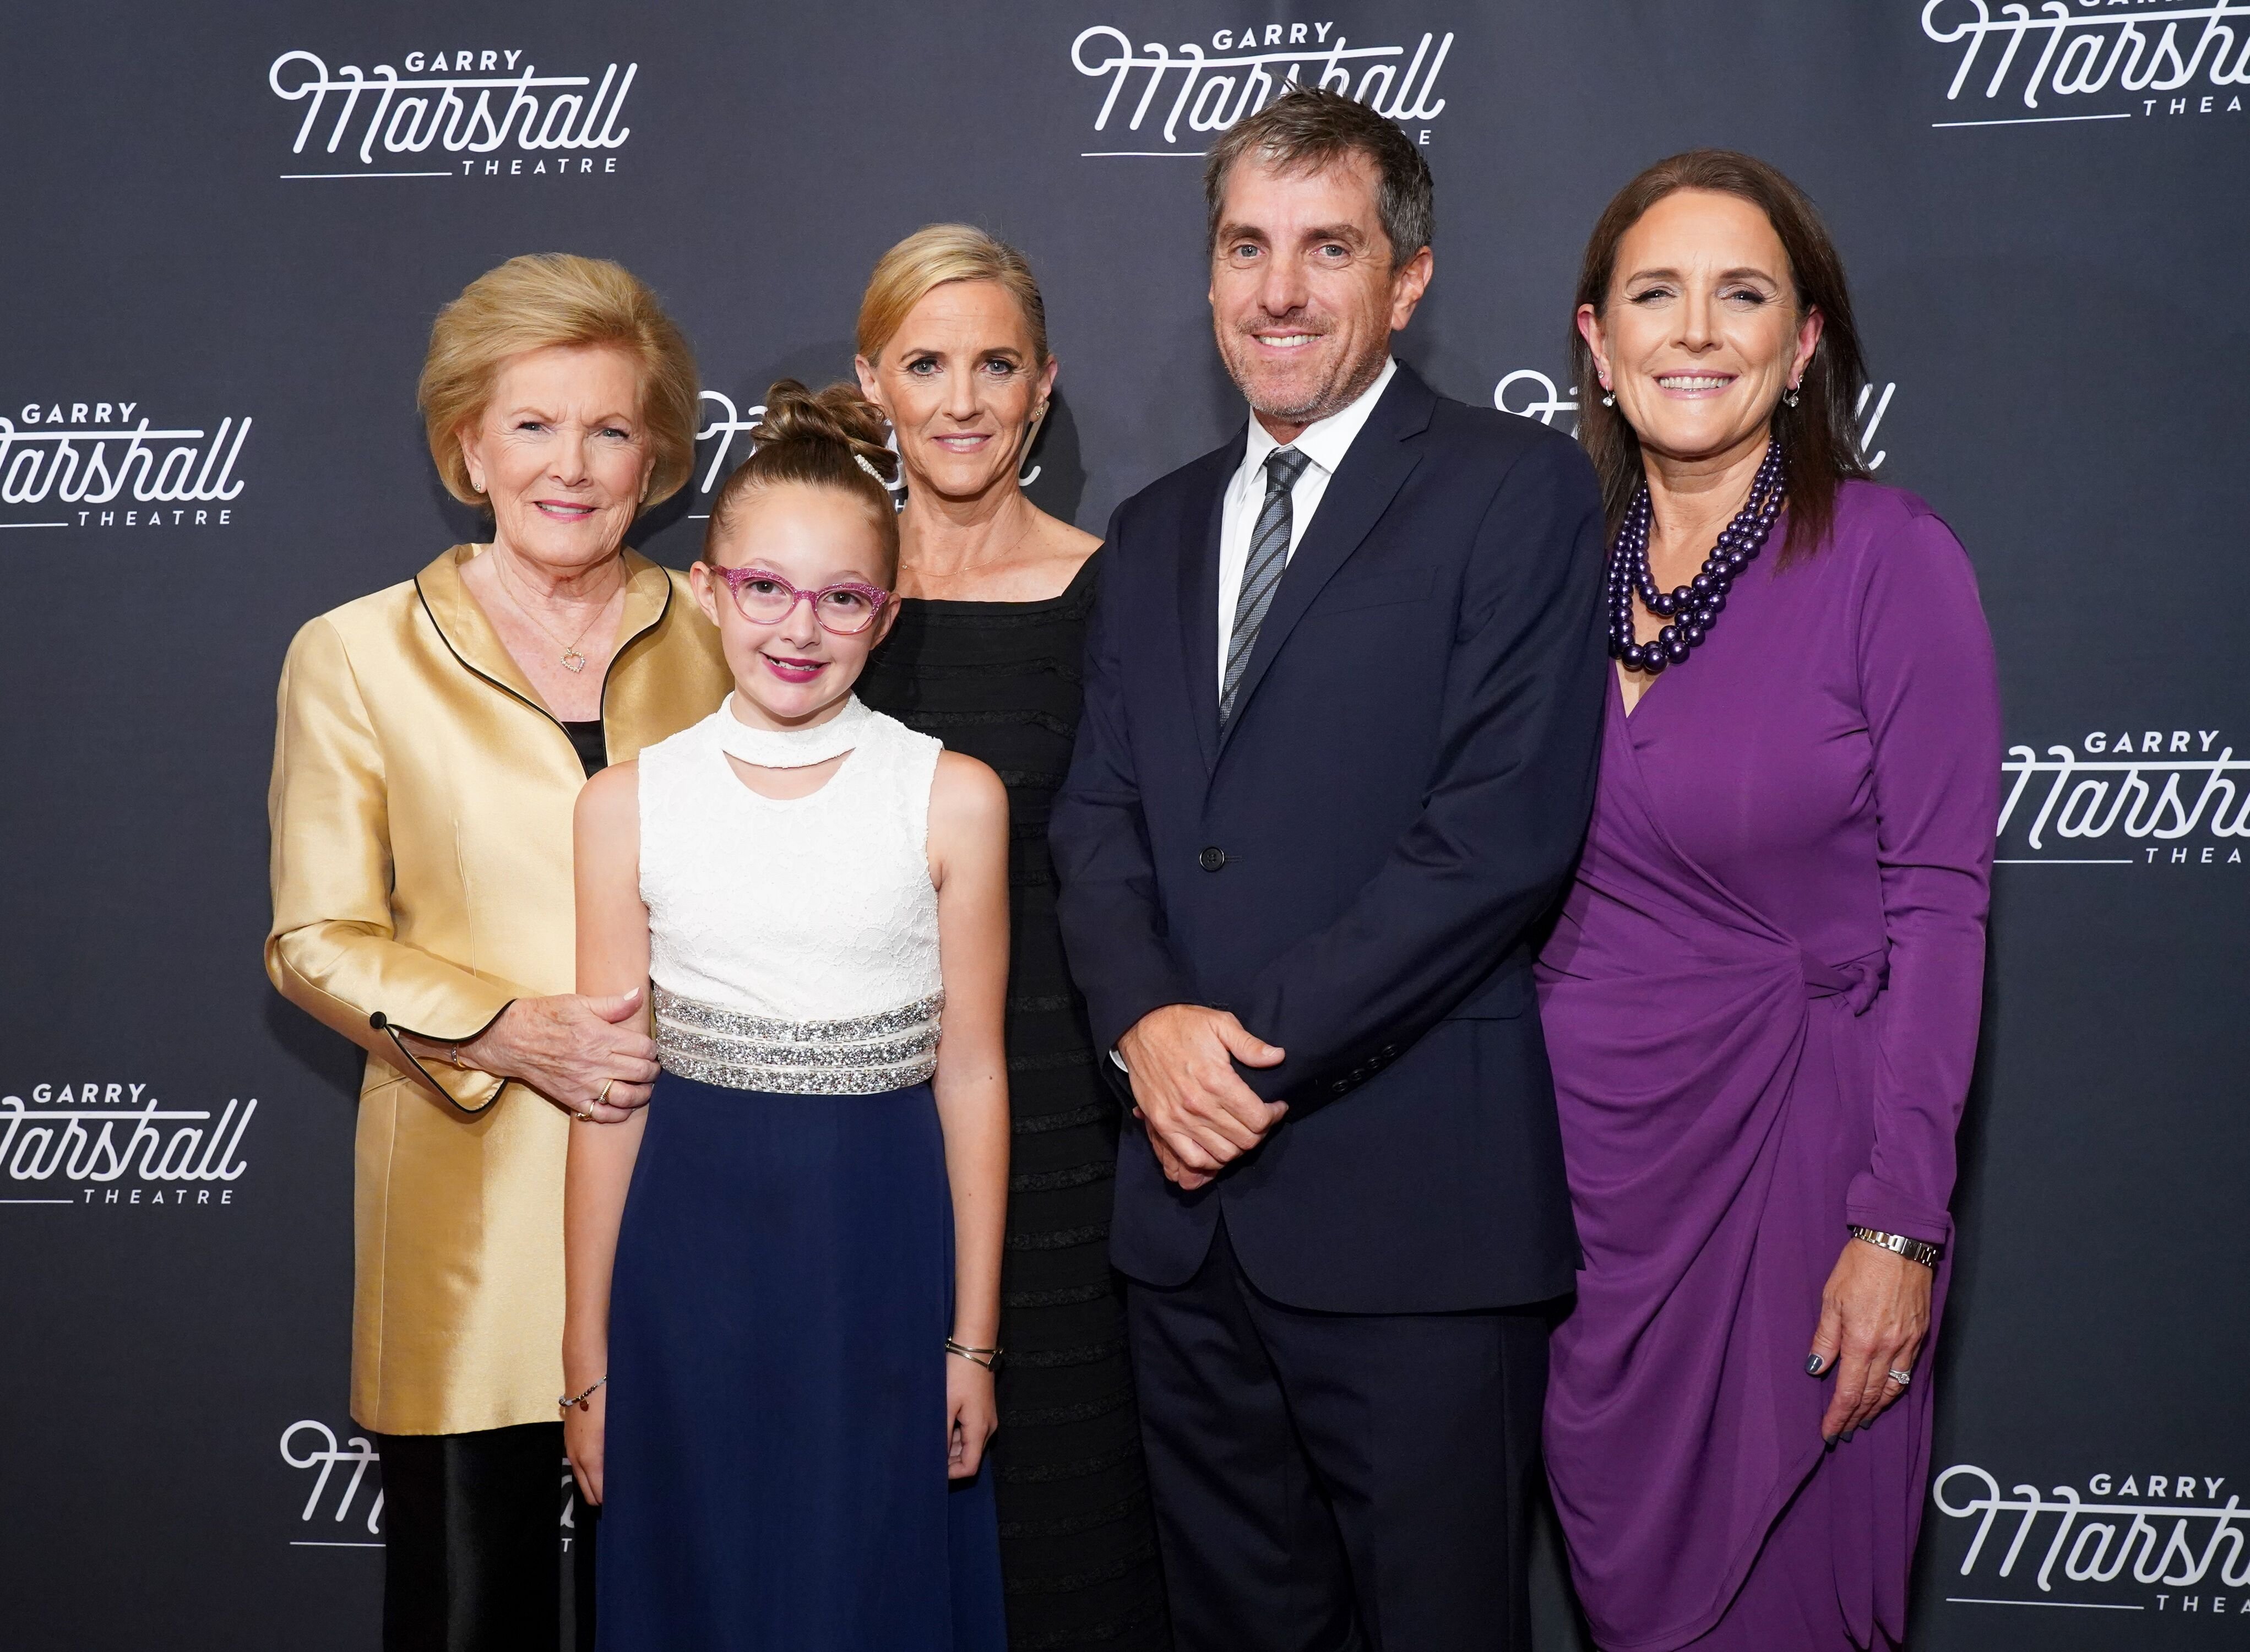 Barbara Marshall, Sienna LaGambini, Kathleen Marshall, Scott Marshall and Lori Marshall at the Garry Marshall Theatre's Annual Founder's Gala Honoring Original "Happy Days" Cast in 2019 in Los Angeles | Source: Getty Images